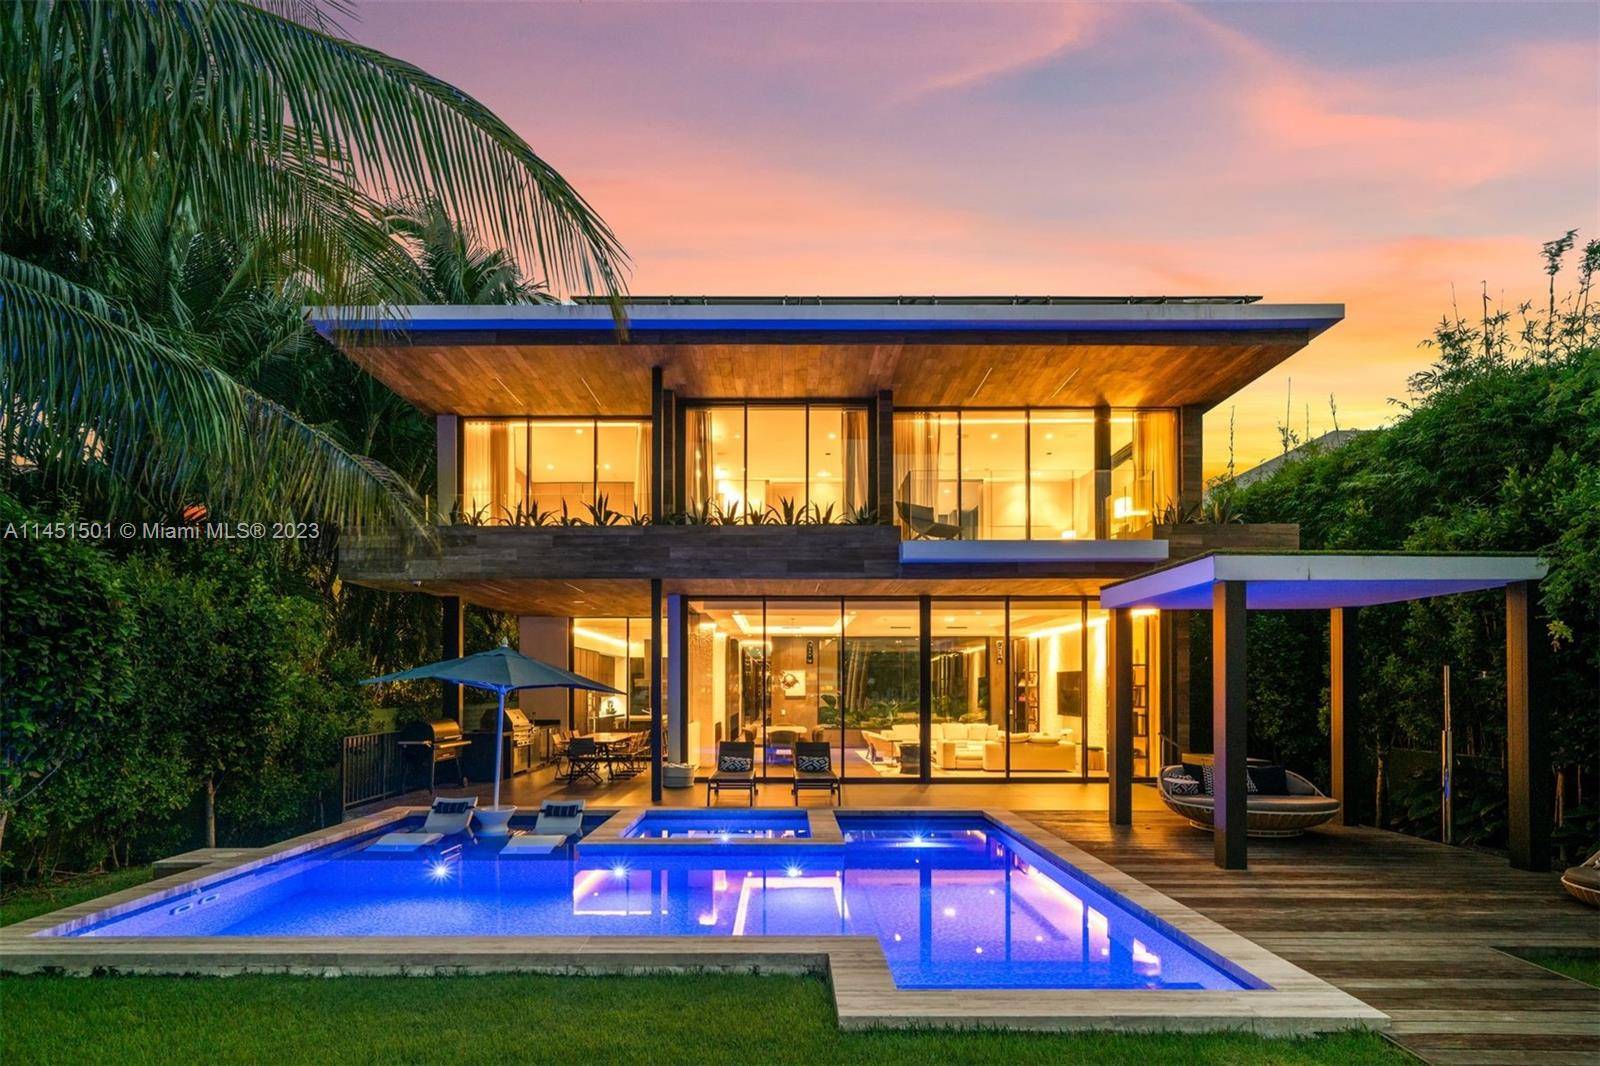 Embrace a modern, tropical lifestyle on the Venetian Islands in this elegant, solar powered home designed by Max Strang featuring exquisite interiors by Studio ABM Design.